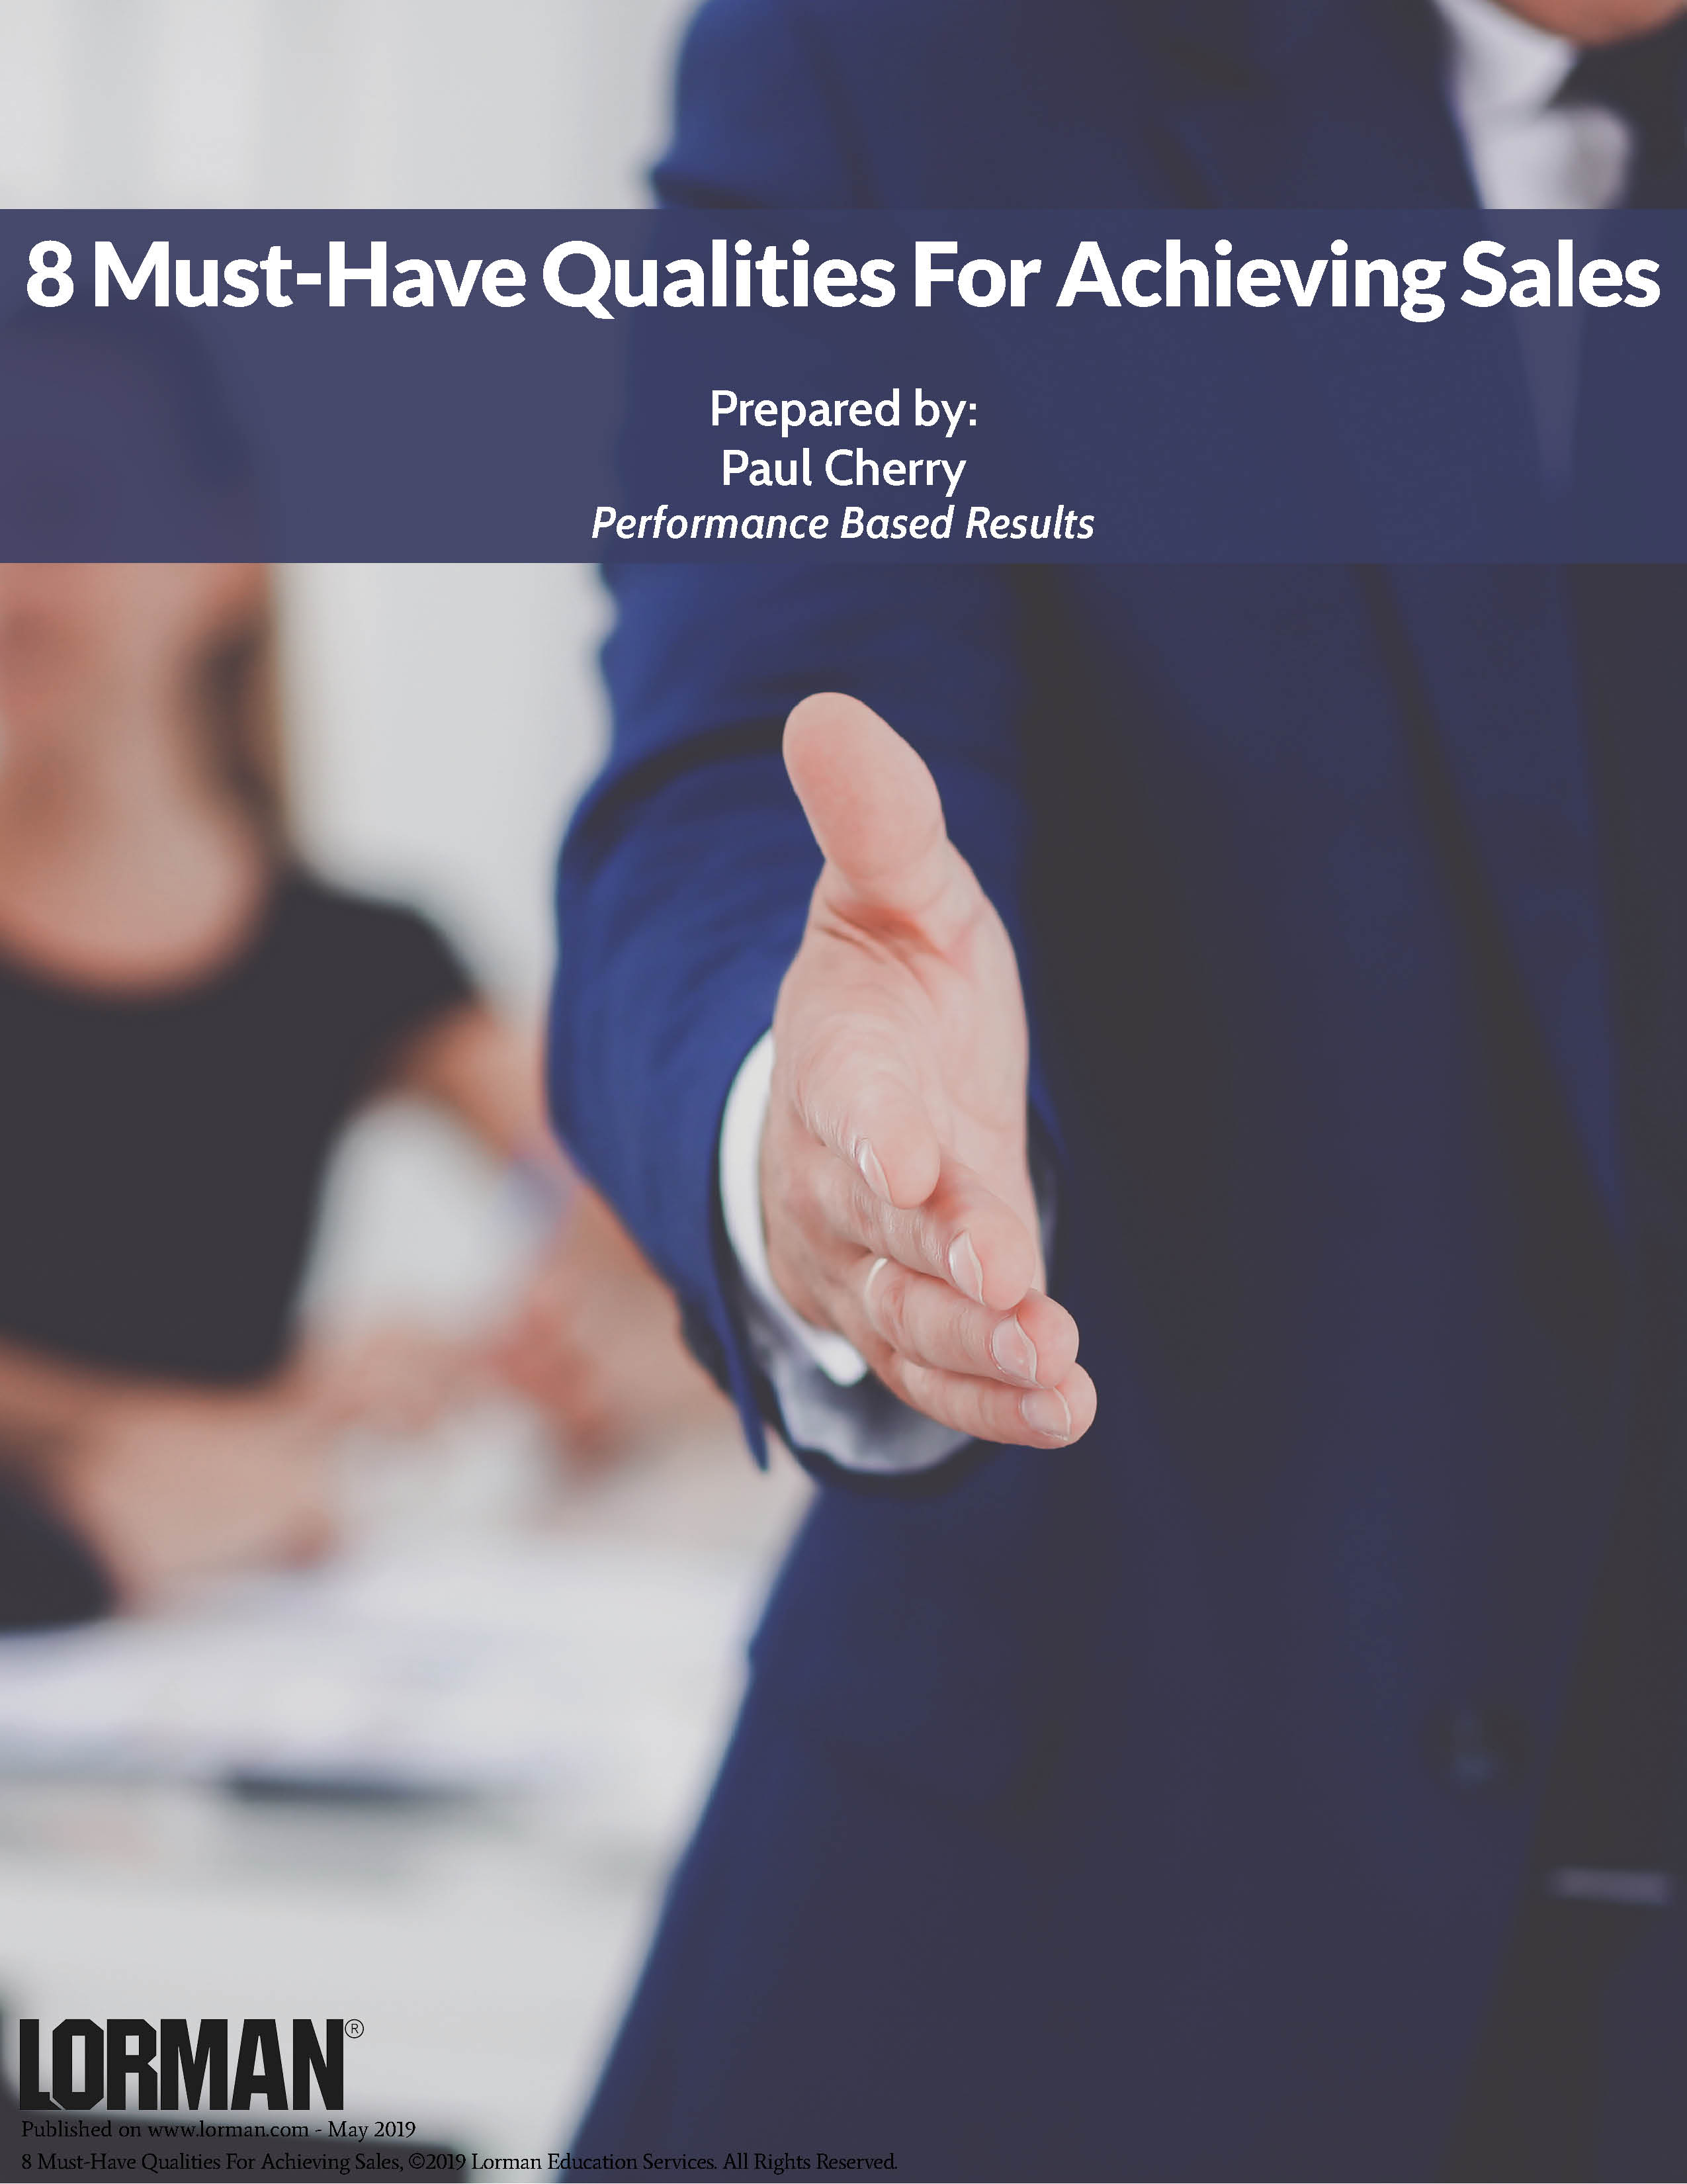 8 Must-Have Qualities For Achieving Sales